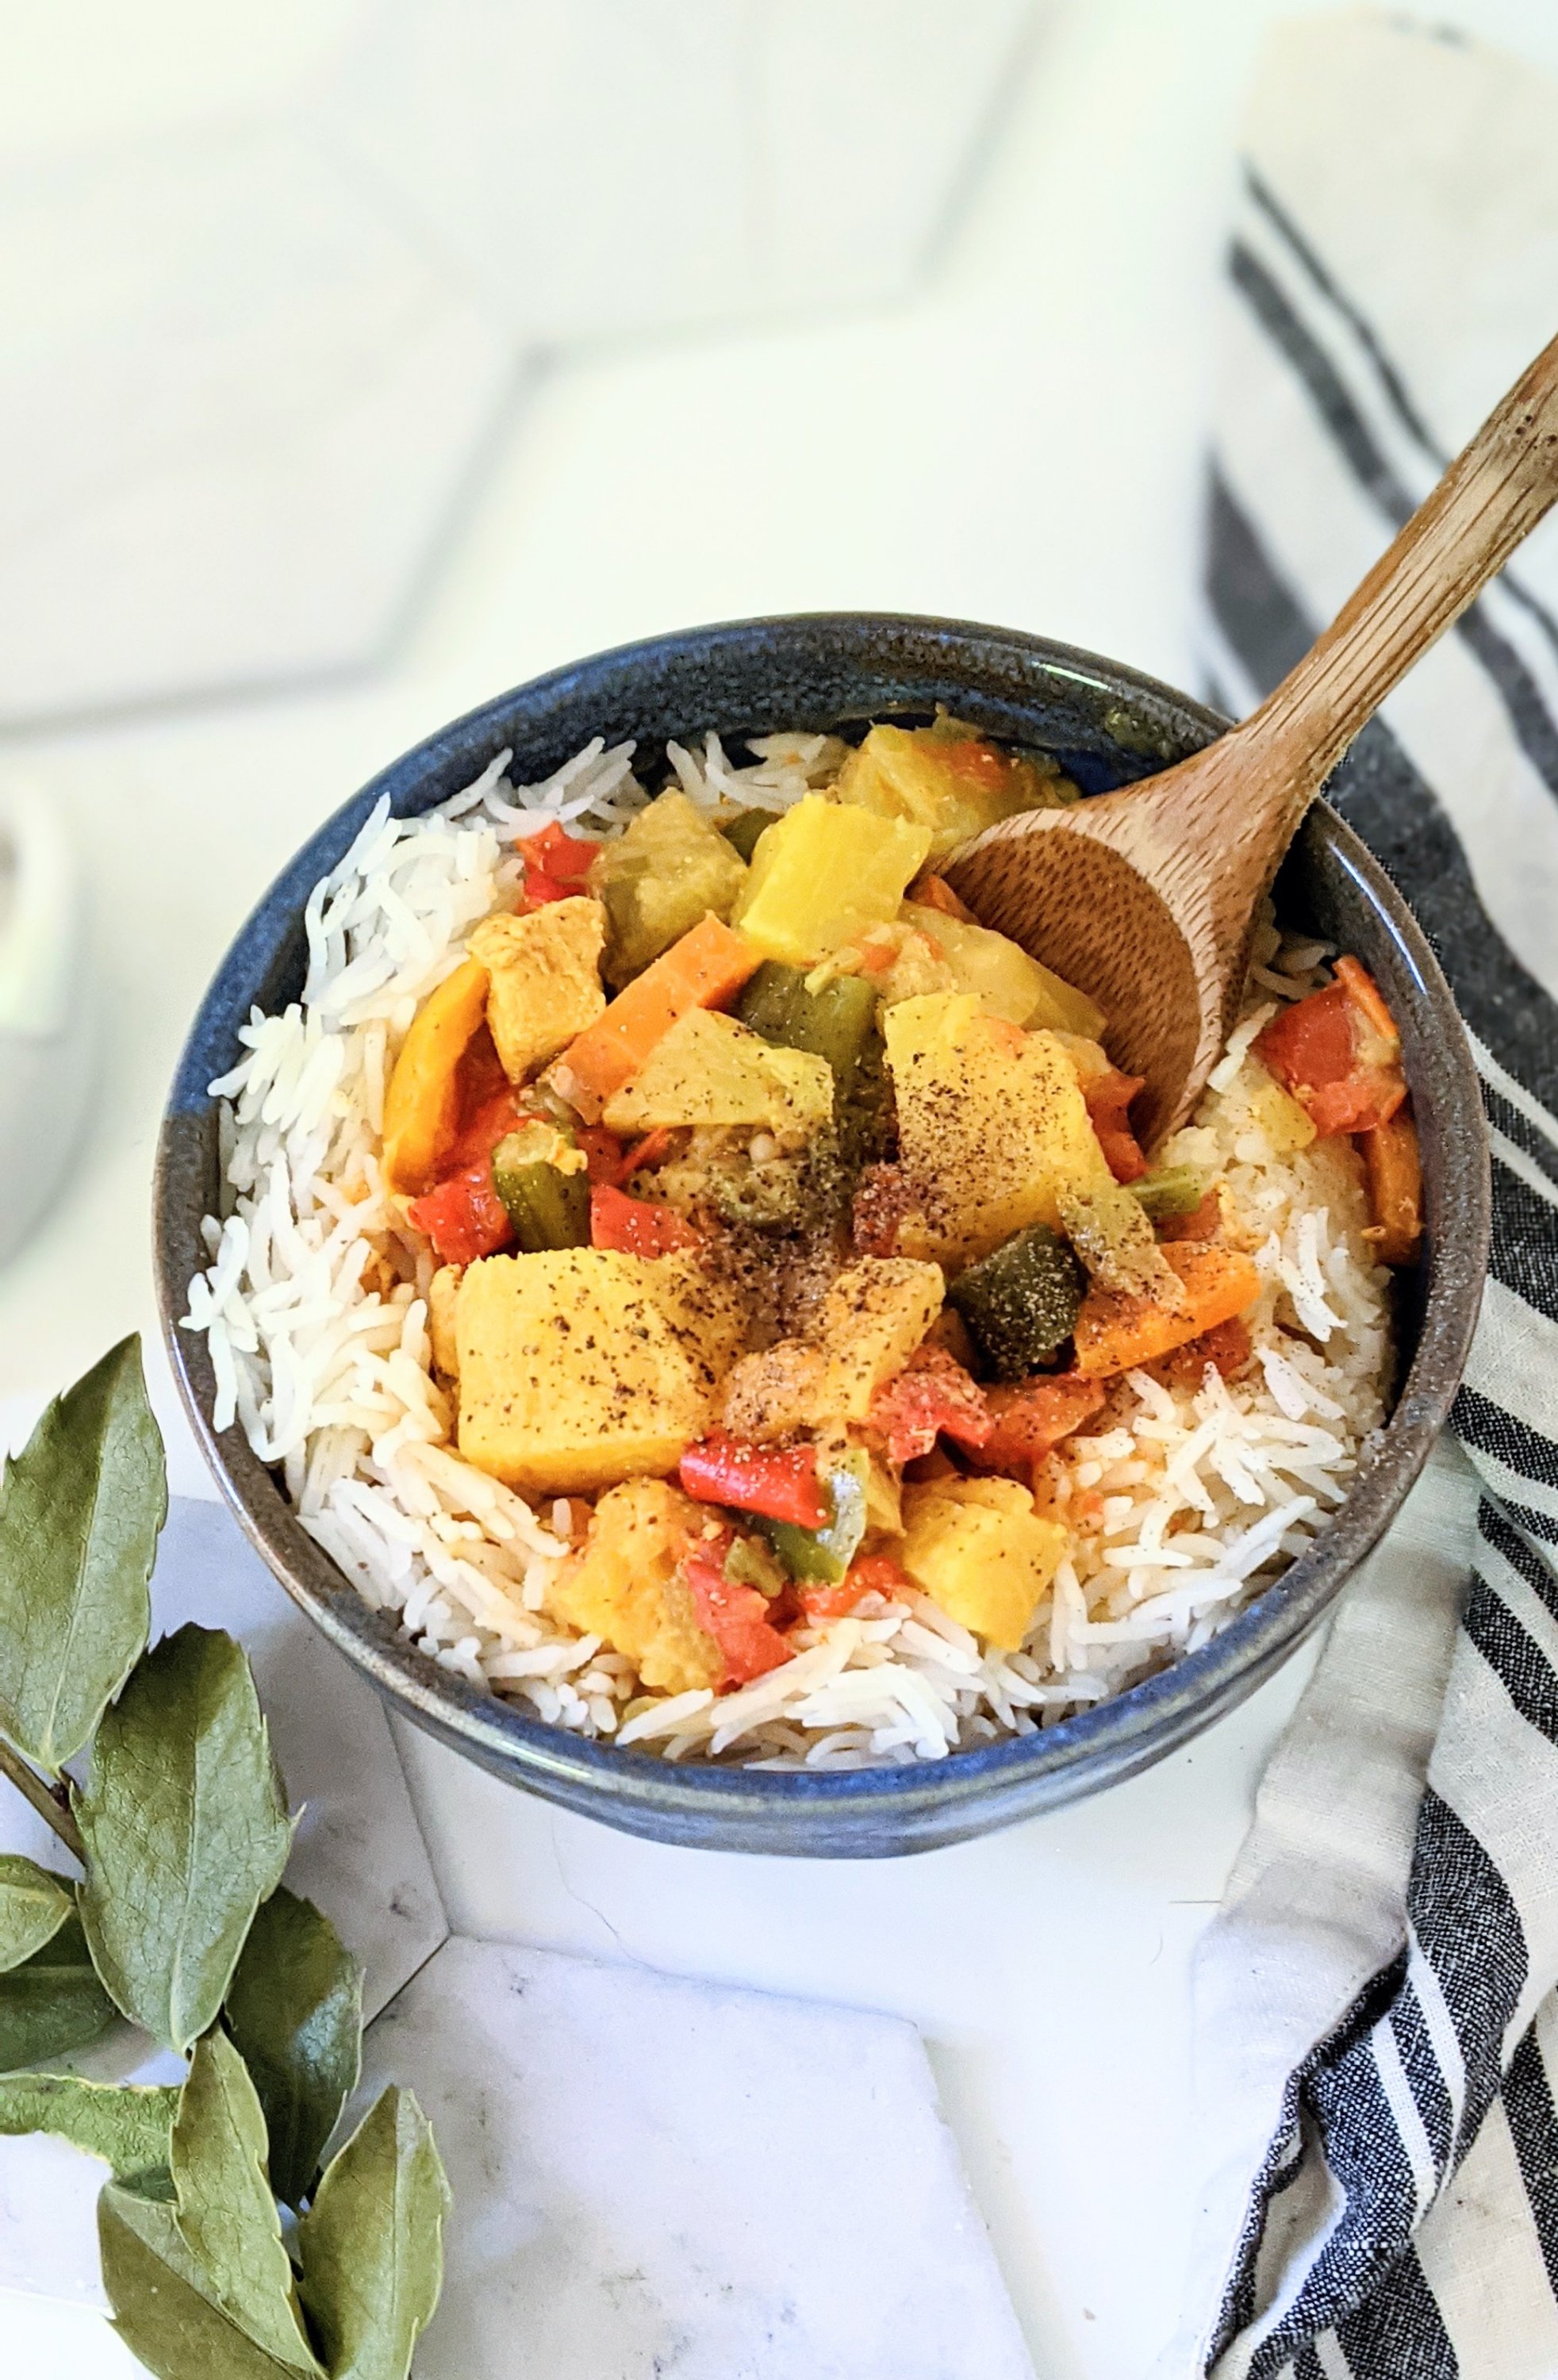 easy weeknight pineapple chicken recipe instant pot dinners under 30 minutes gluten free chicken pineapple curry pressure cooker dinner ideas with chicken breast and vegetables the family loves